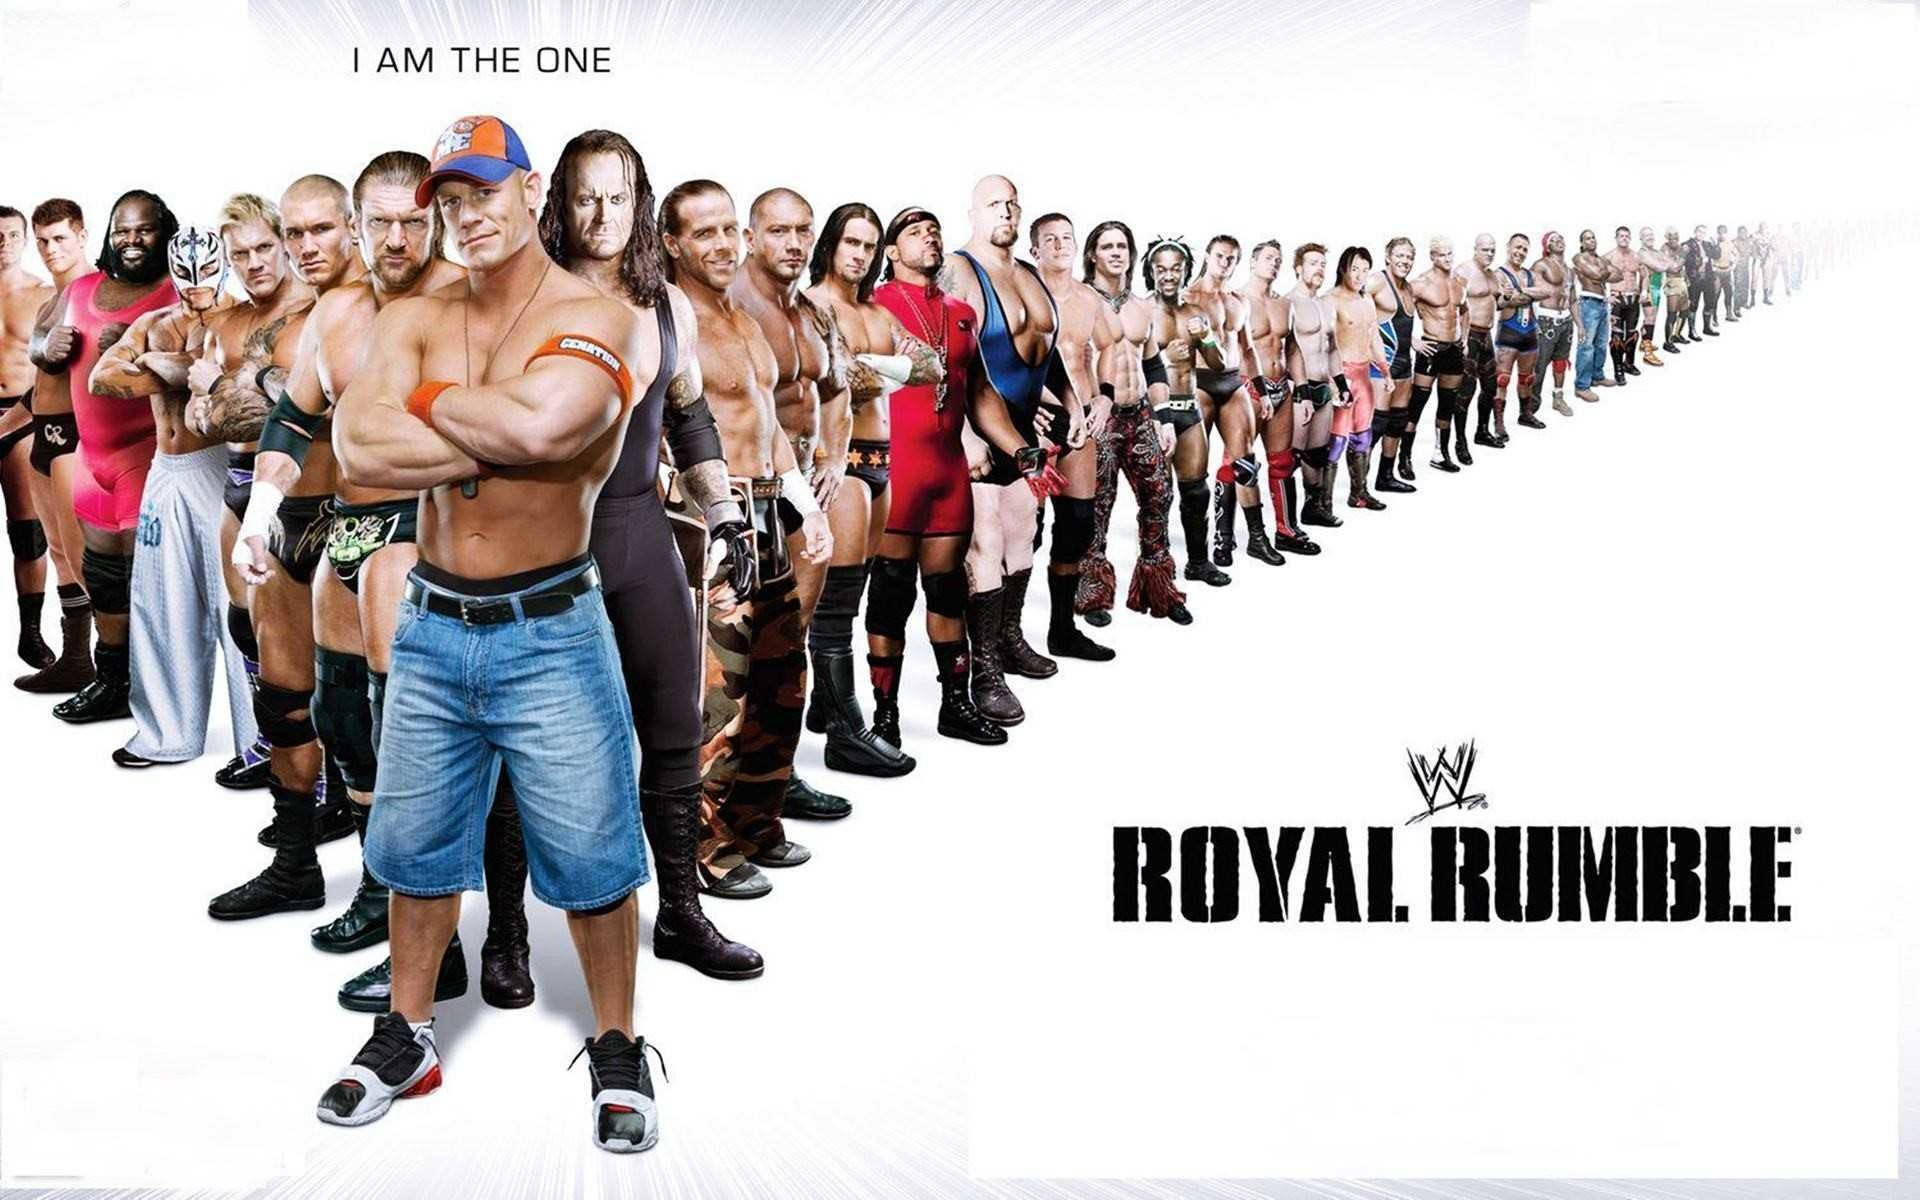 Get Ready For Action! Experience An Epic Royal Rumble